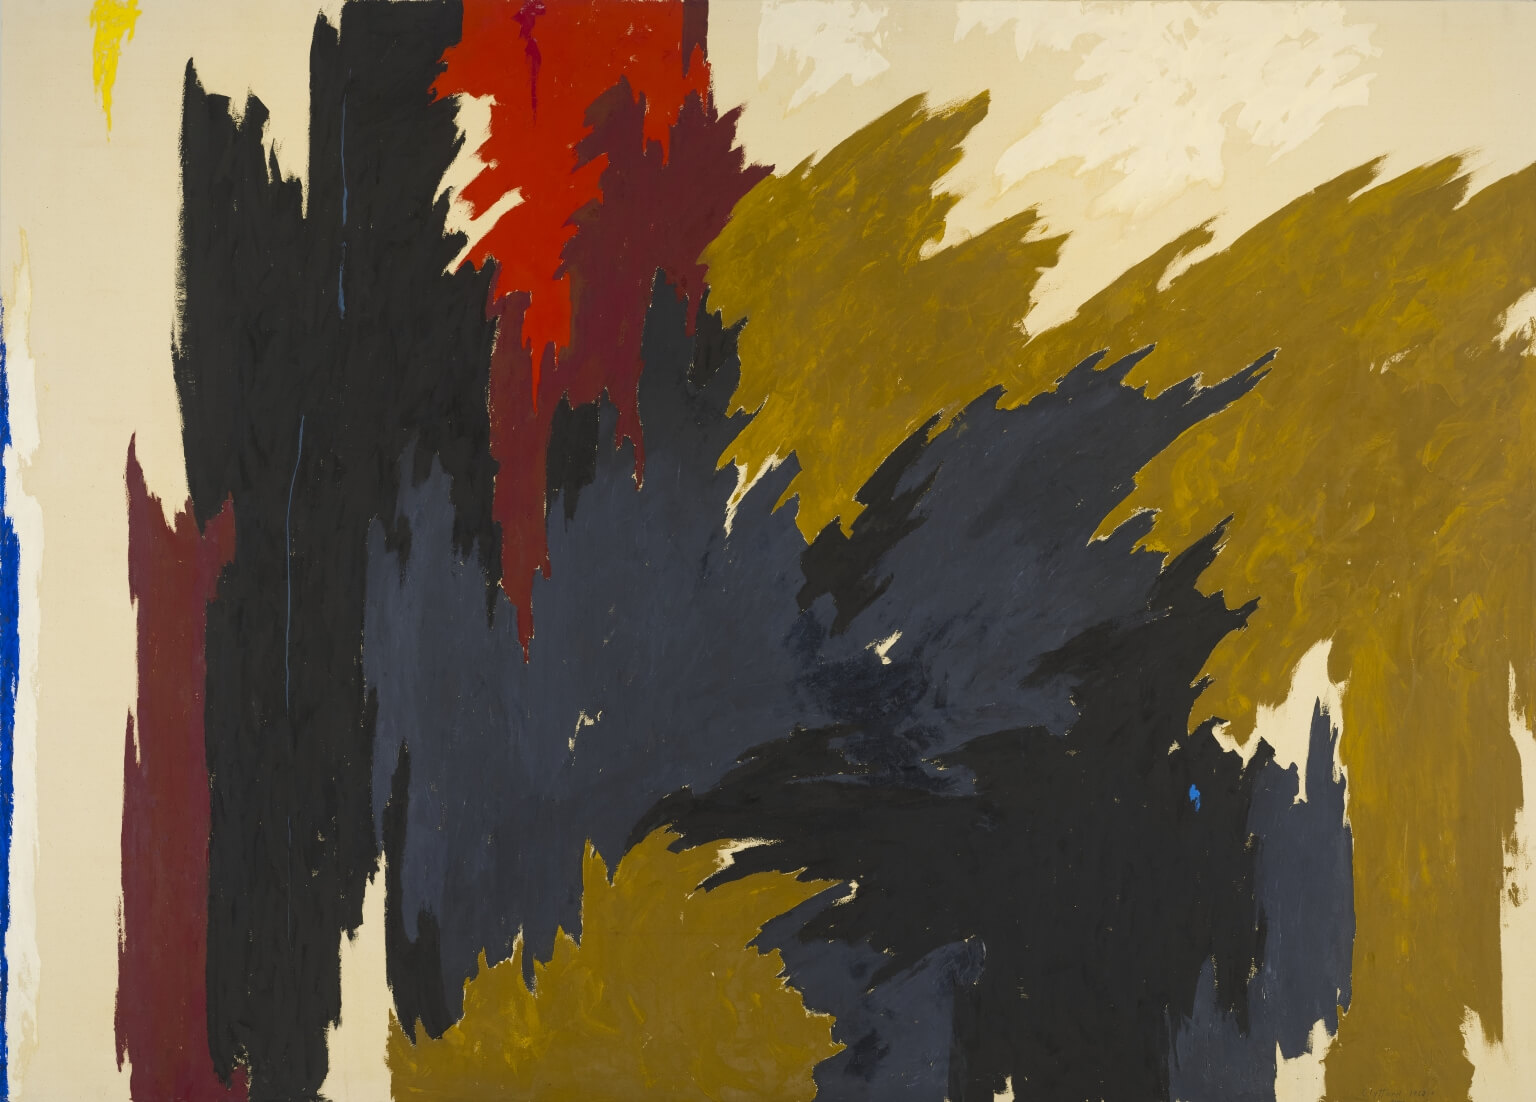 Abstract painting with black, blue, gold, red, maroon, white, and yellow paint in jagged shapes seeming to move up to the corner